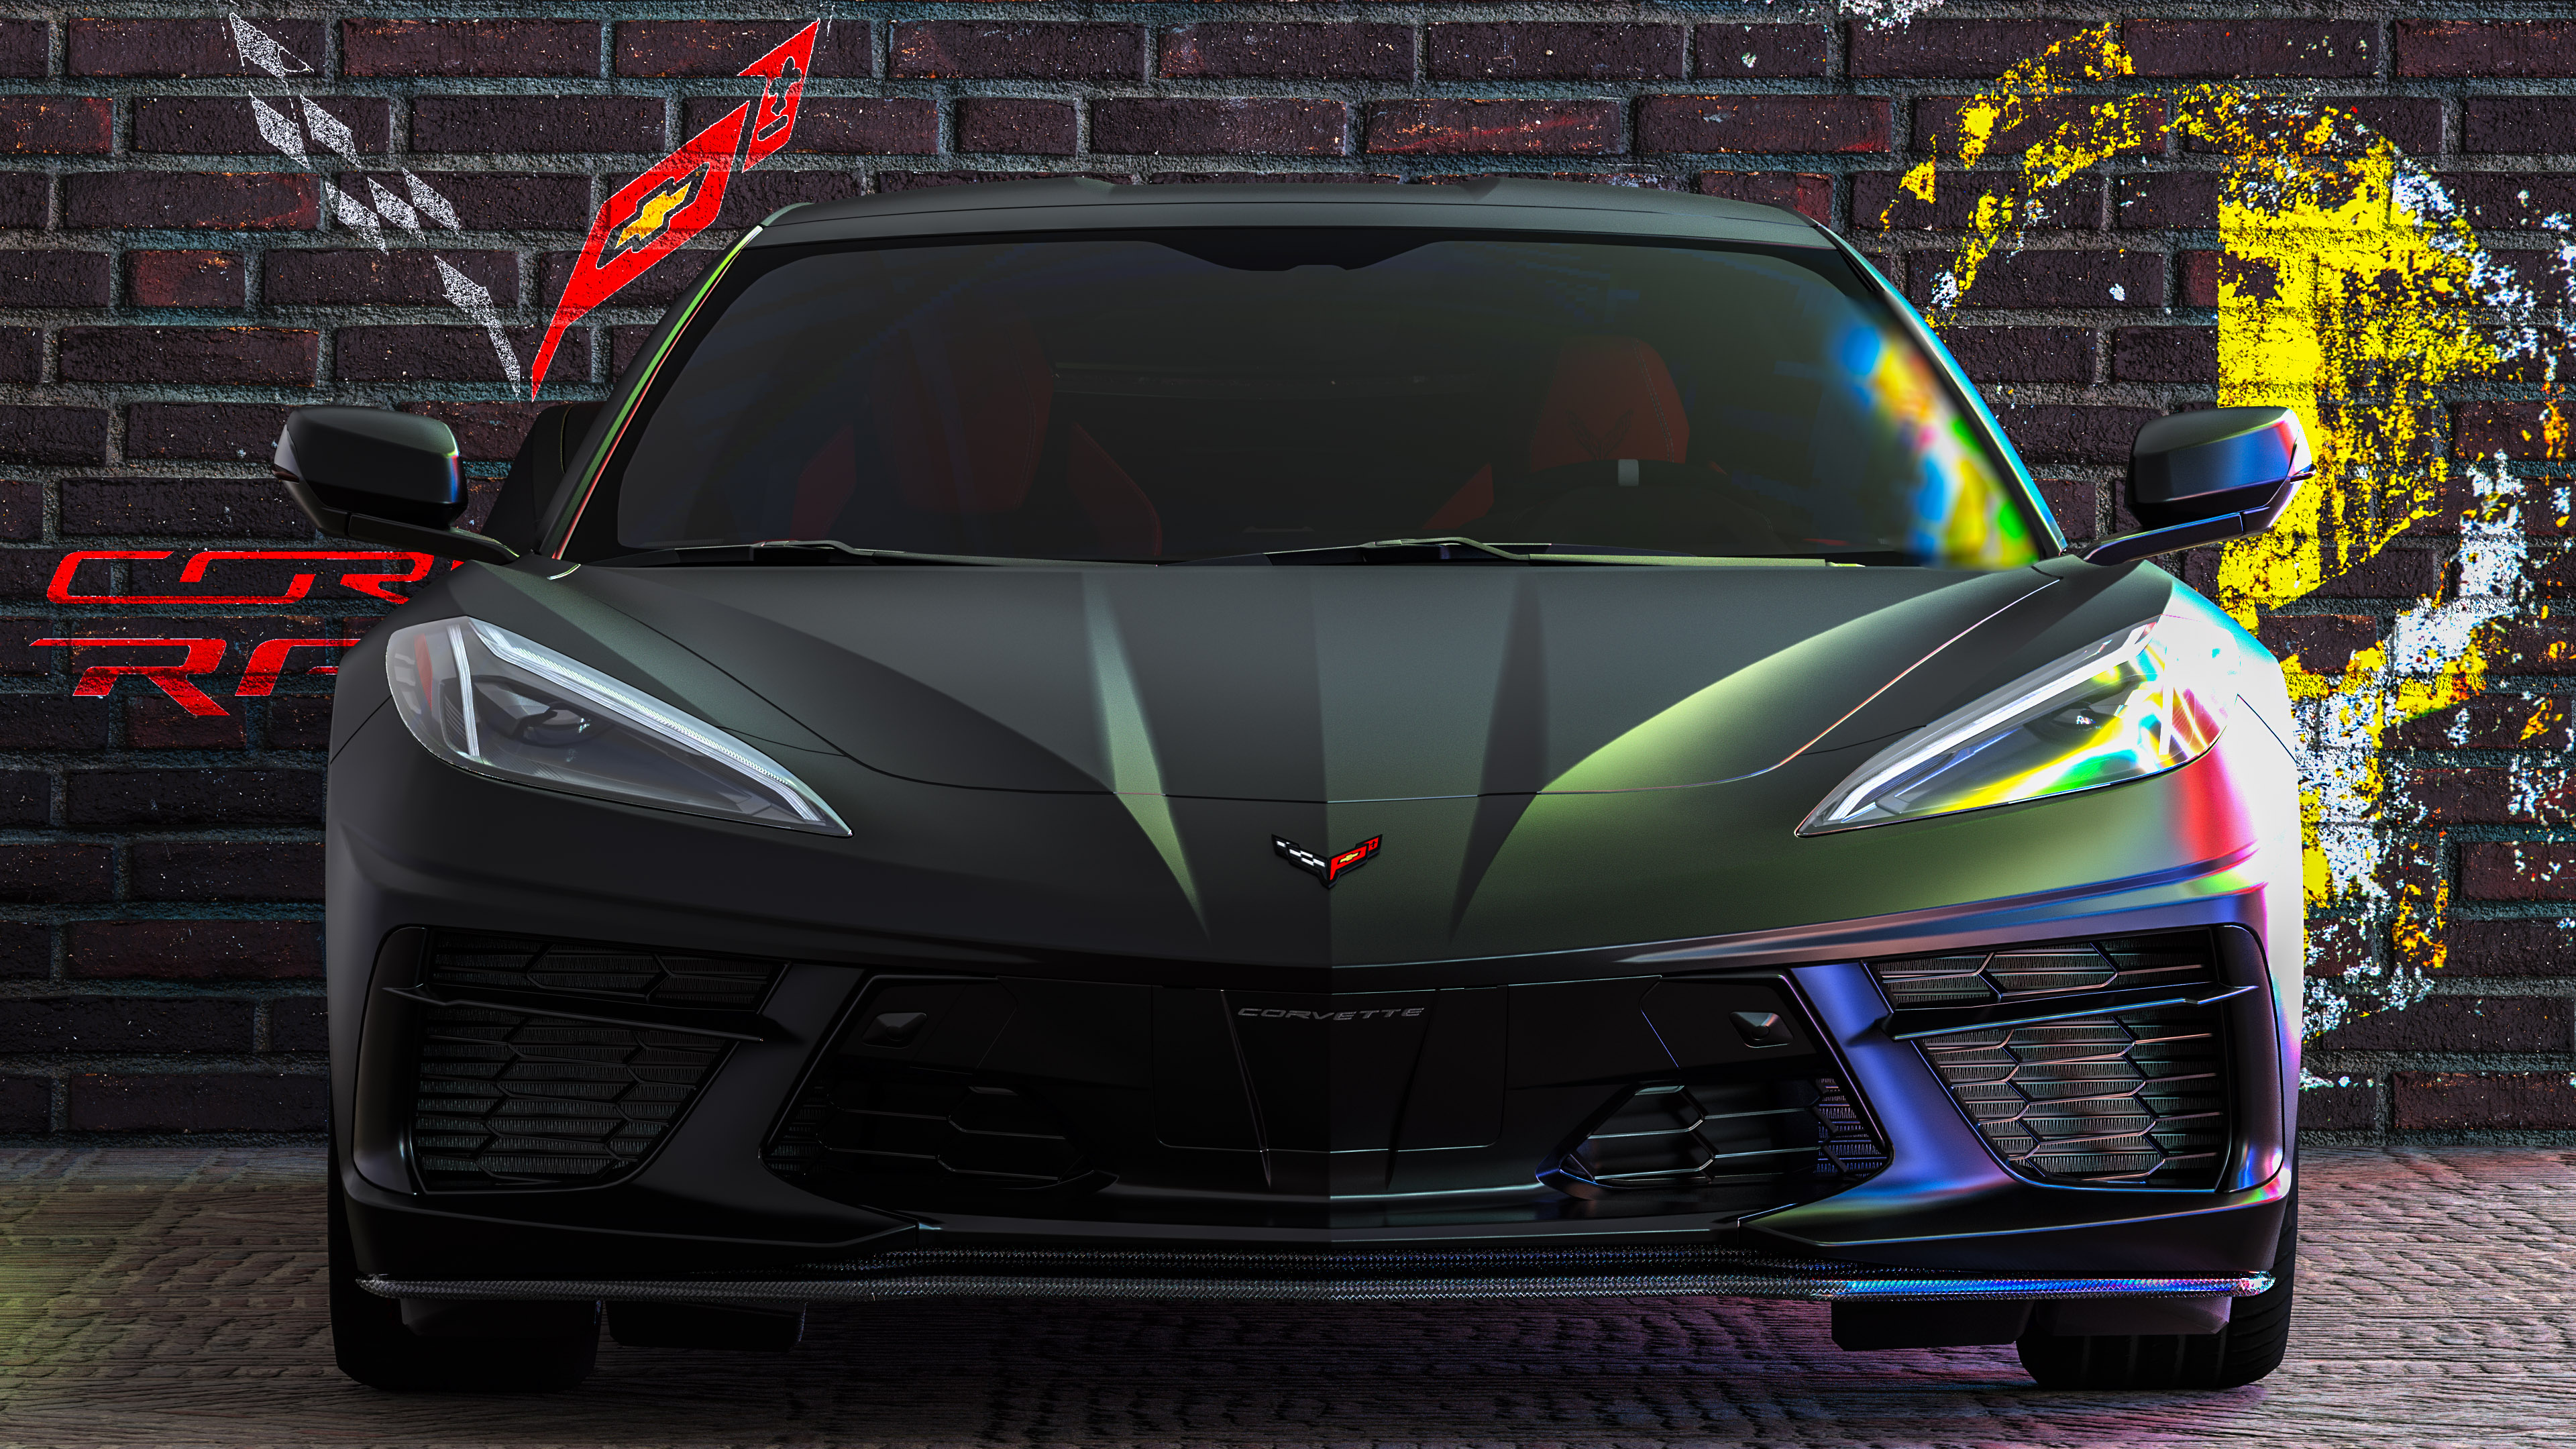 Dive into the world of speed with our sports car wallpaper showcasing the Chevrolet Corvette, an icon of American automotive design.